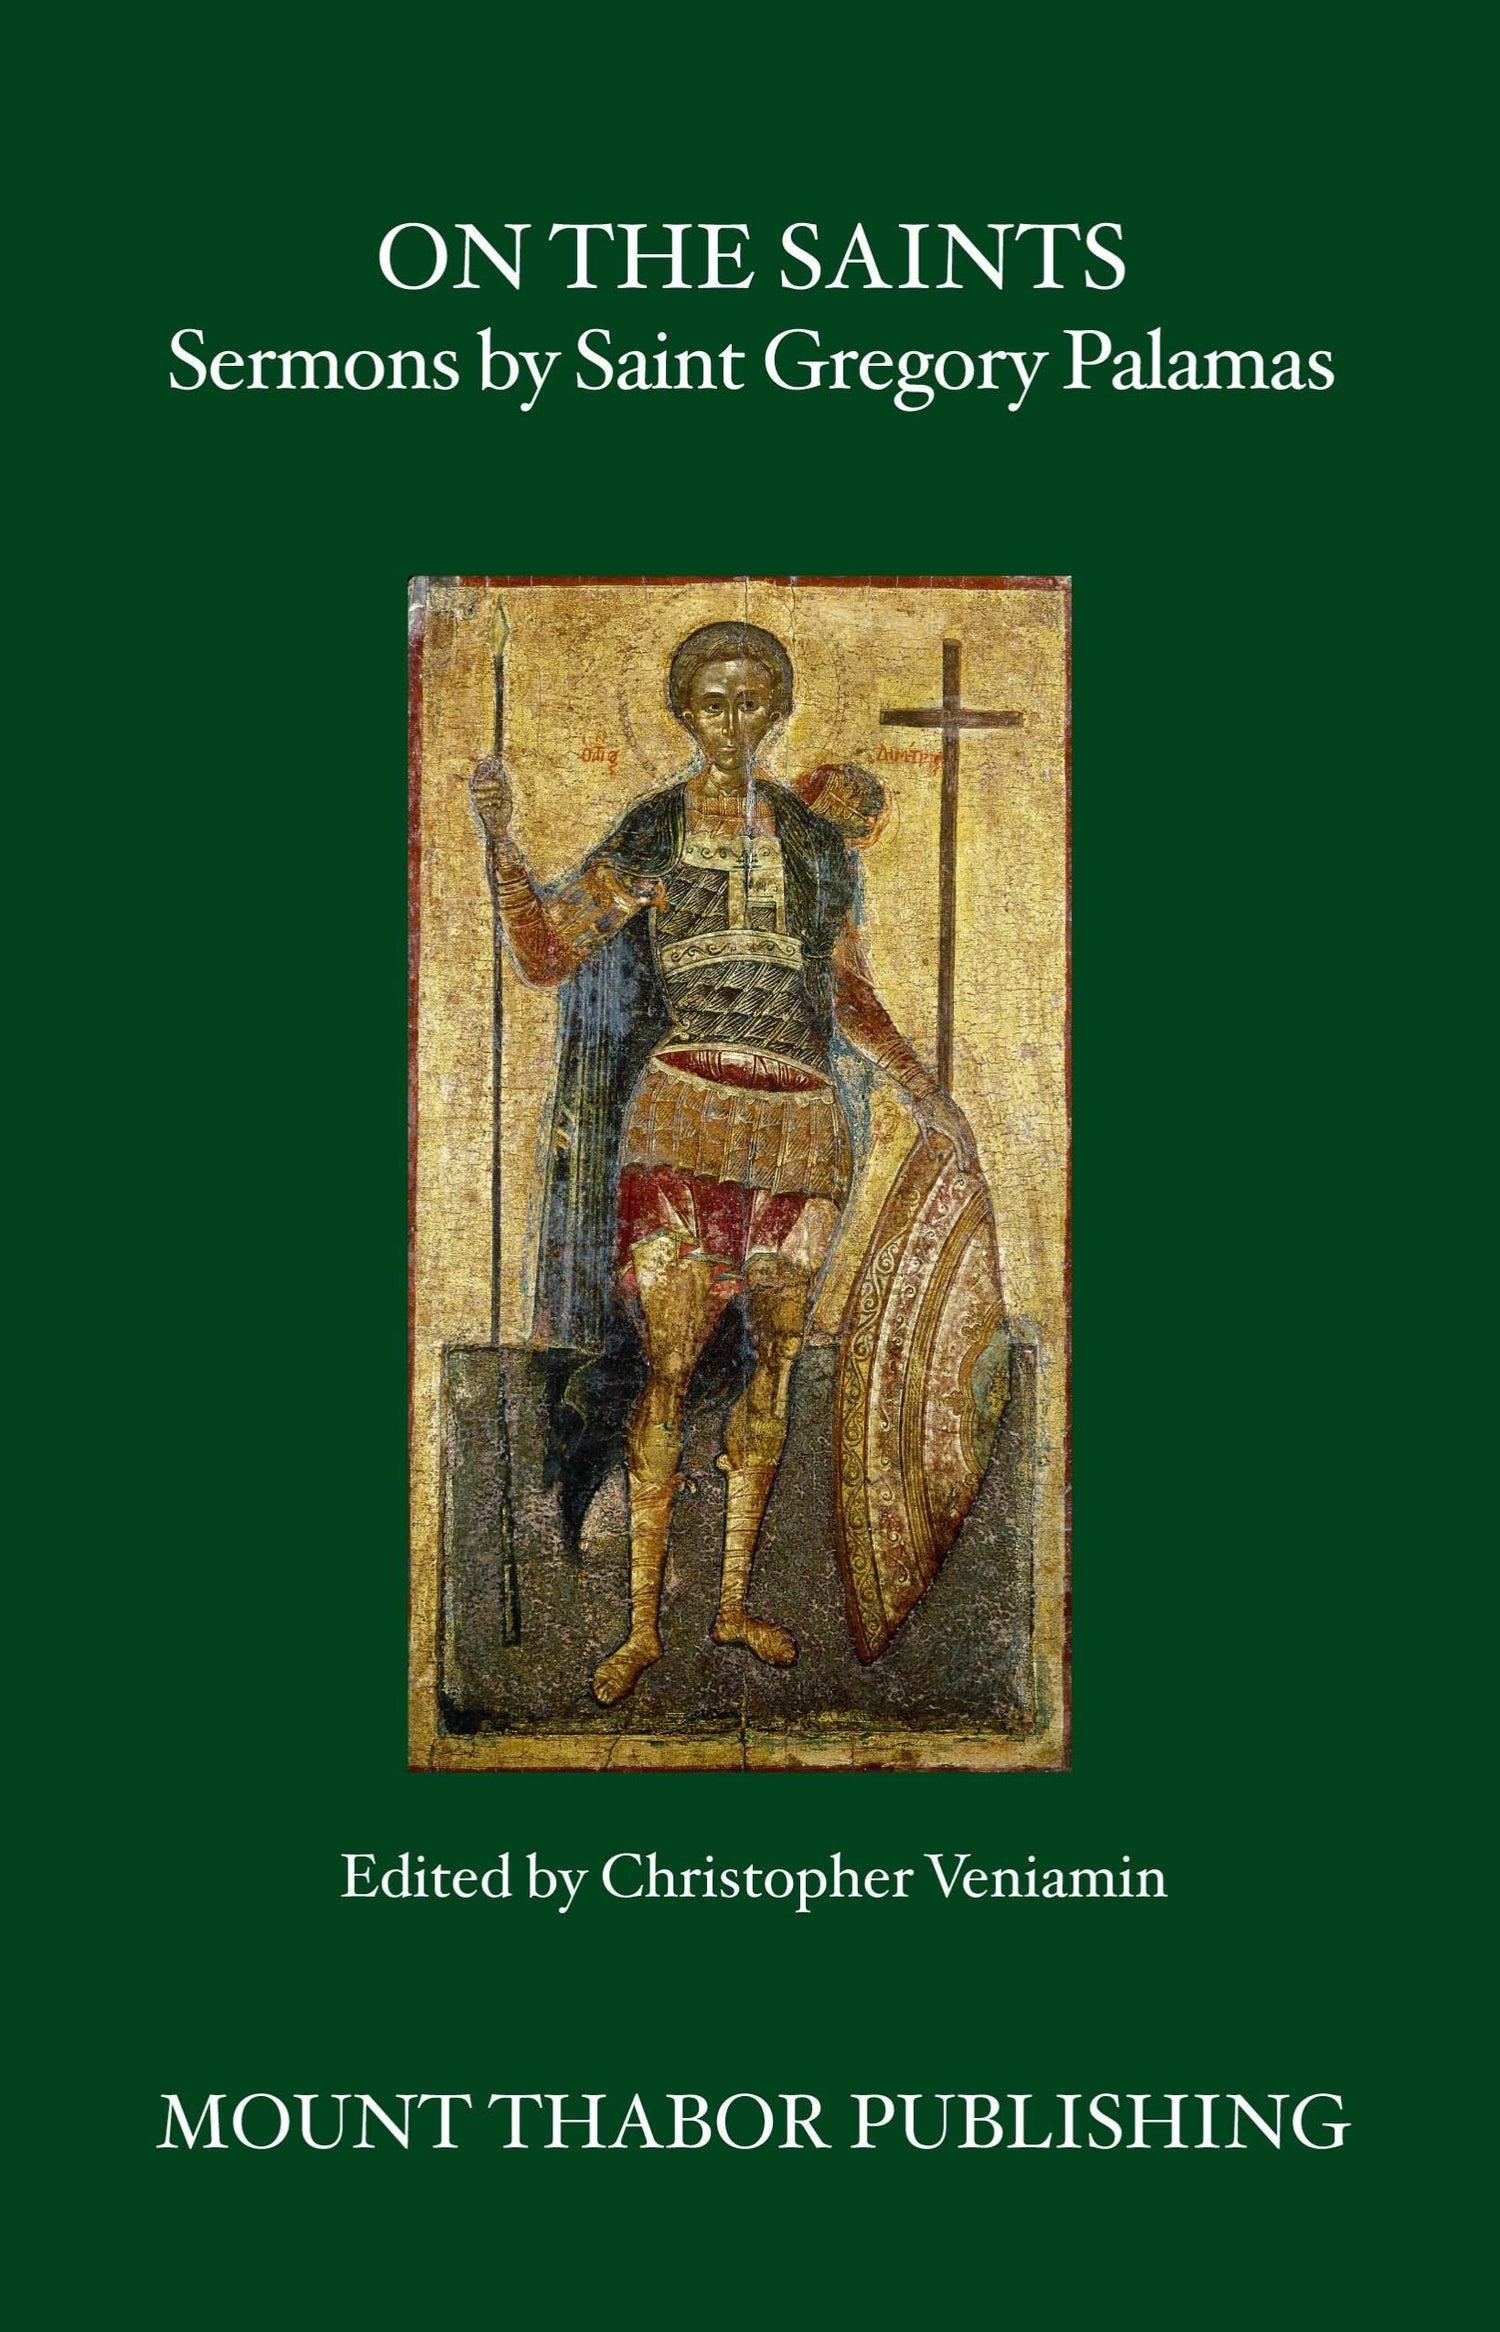 Front Cover of On the Saints: Sermons by St. Gregory Palamas (Edited and Translated by Christopher Veniamin)